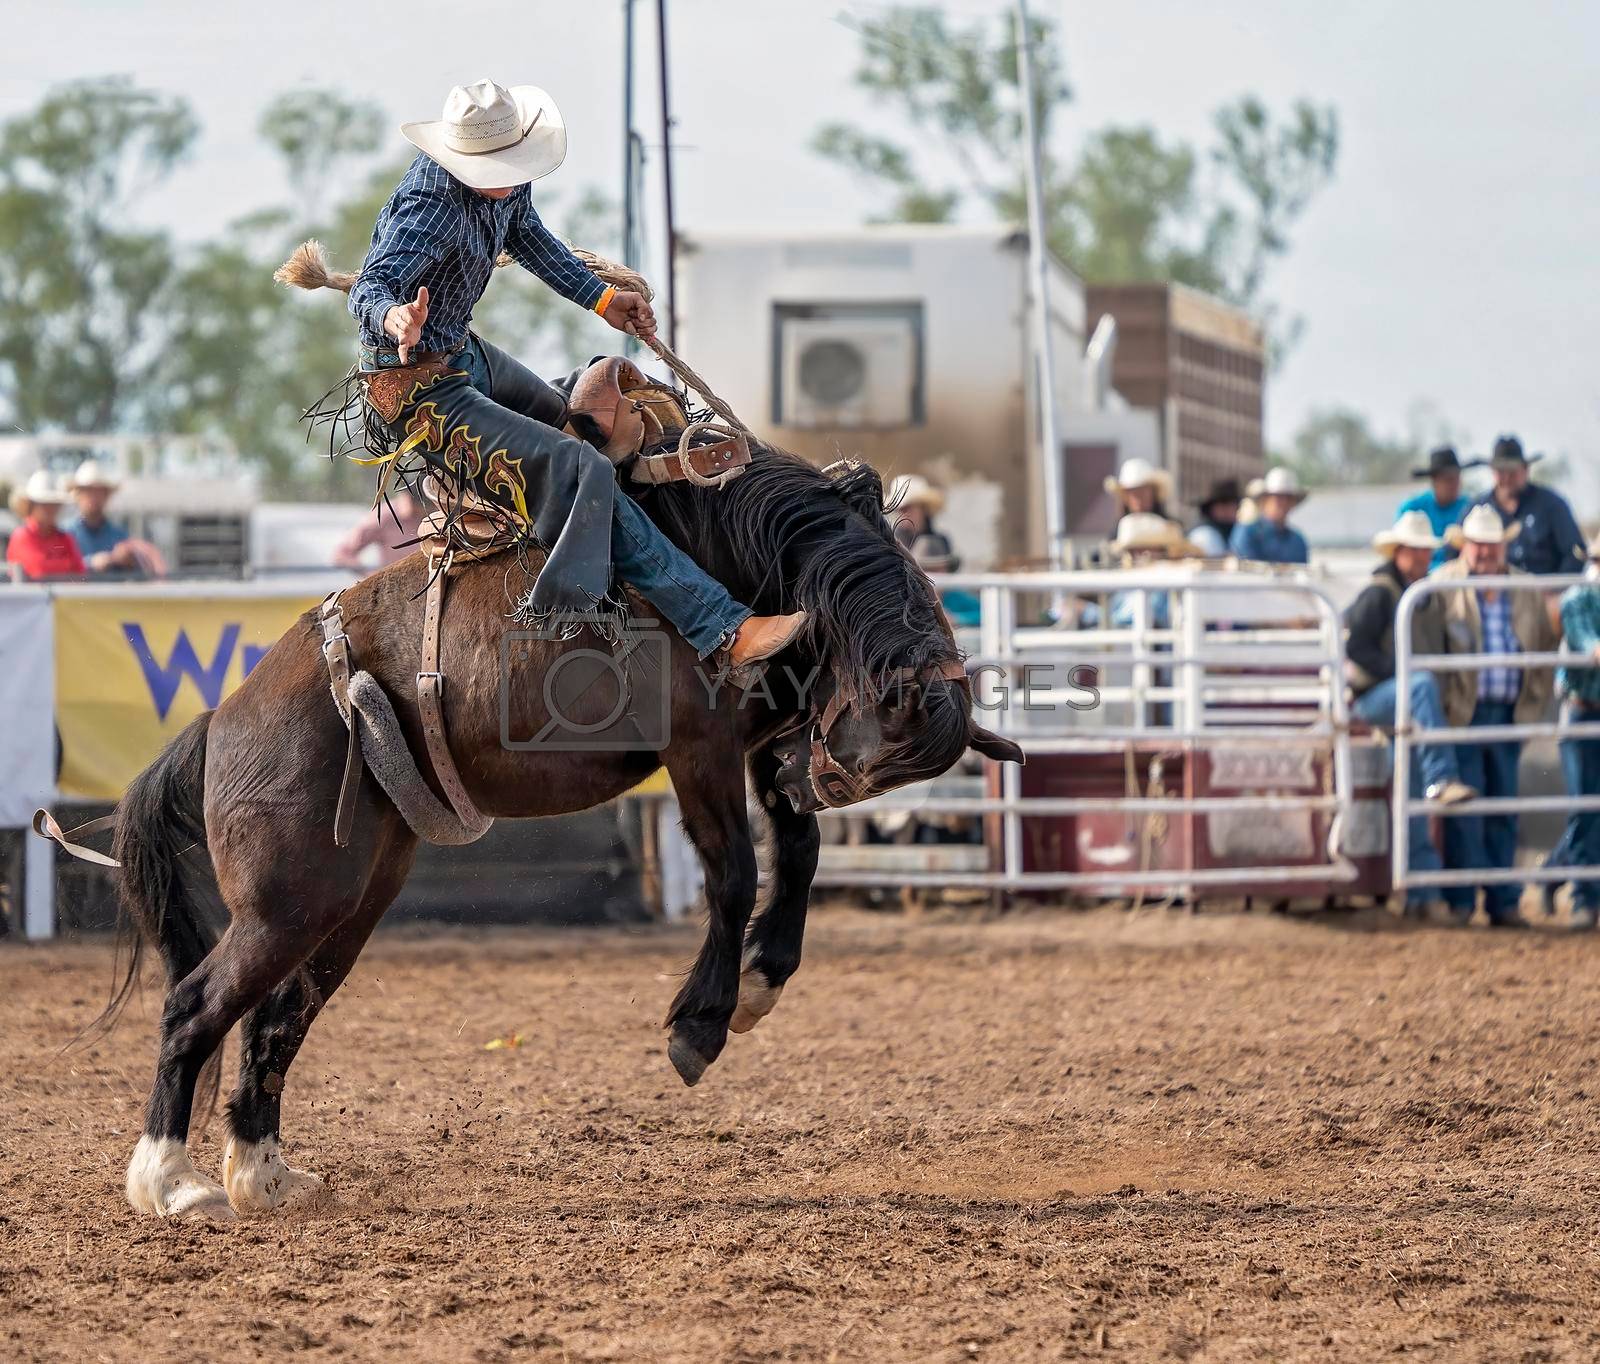 Royalty free image of Saddle Bronco Riding At Country Rodeo by 	JacksonStock